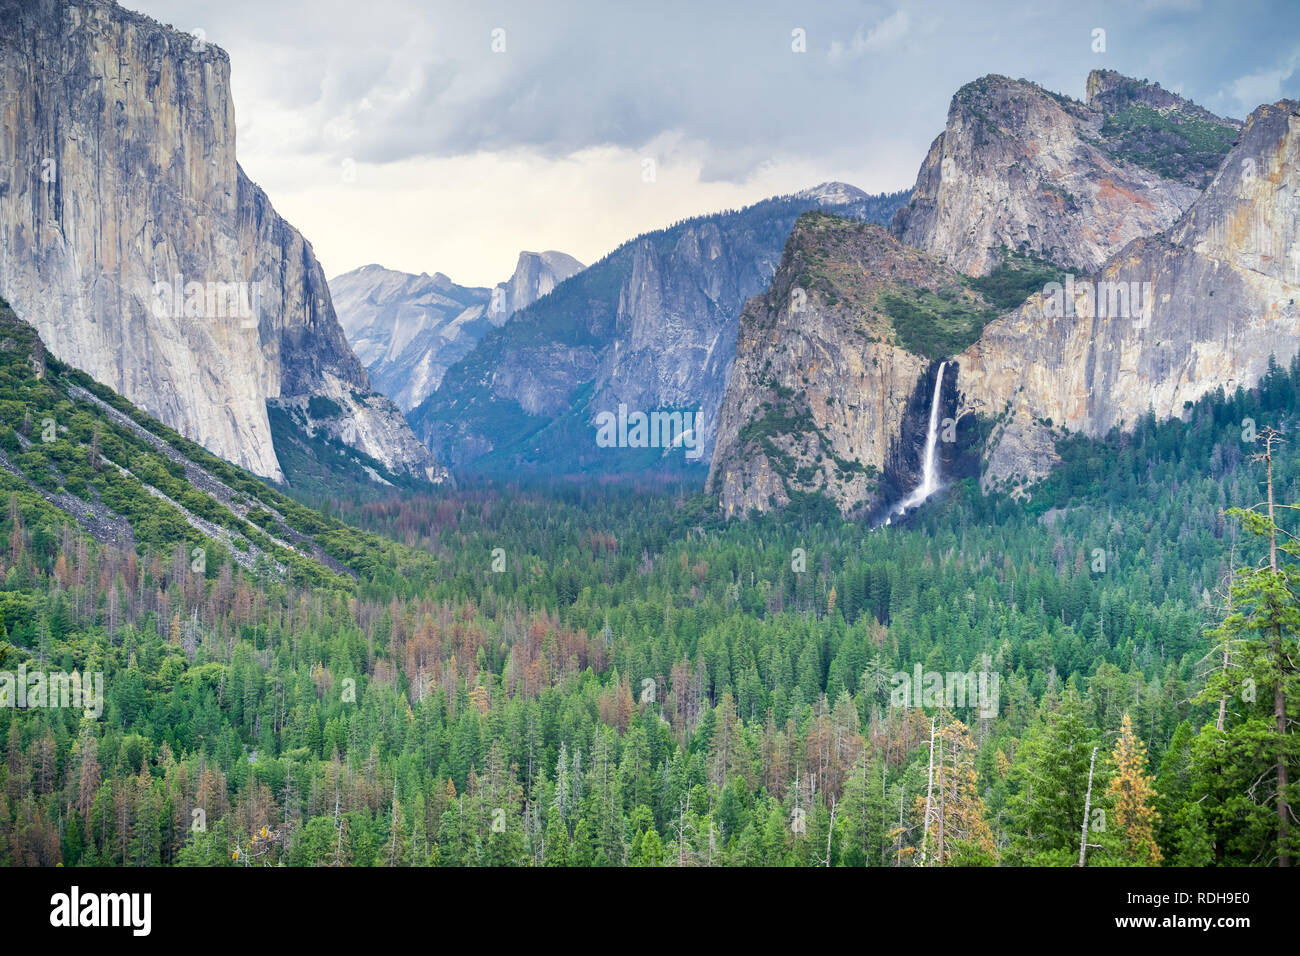 Yosemite valley as seen from Tunnel View vista point on a stormy summer day, Yosemite National Park, California Stock Photo